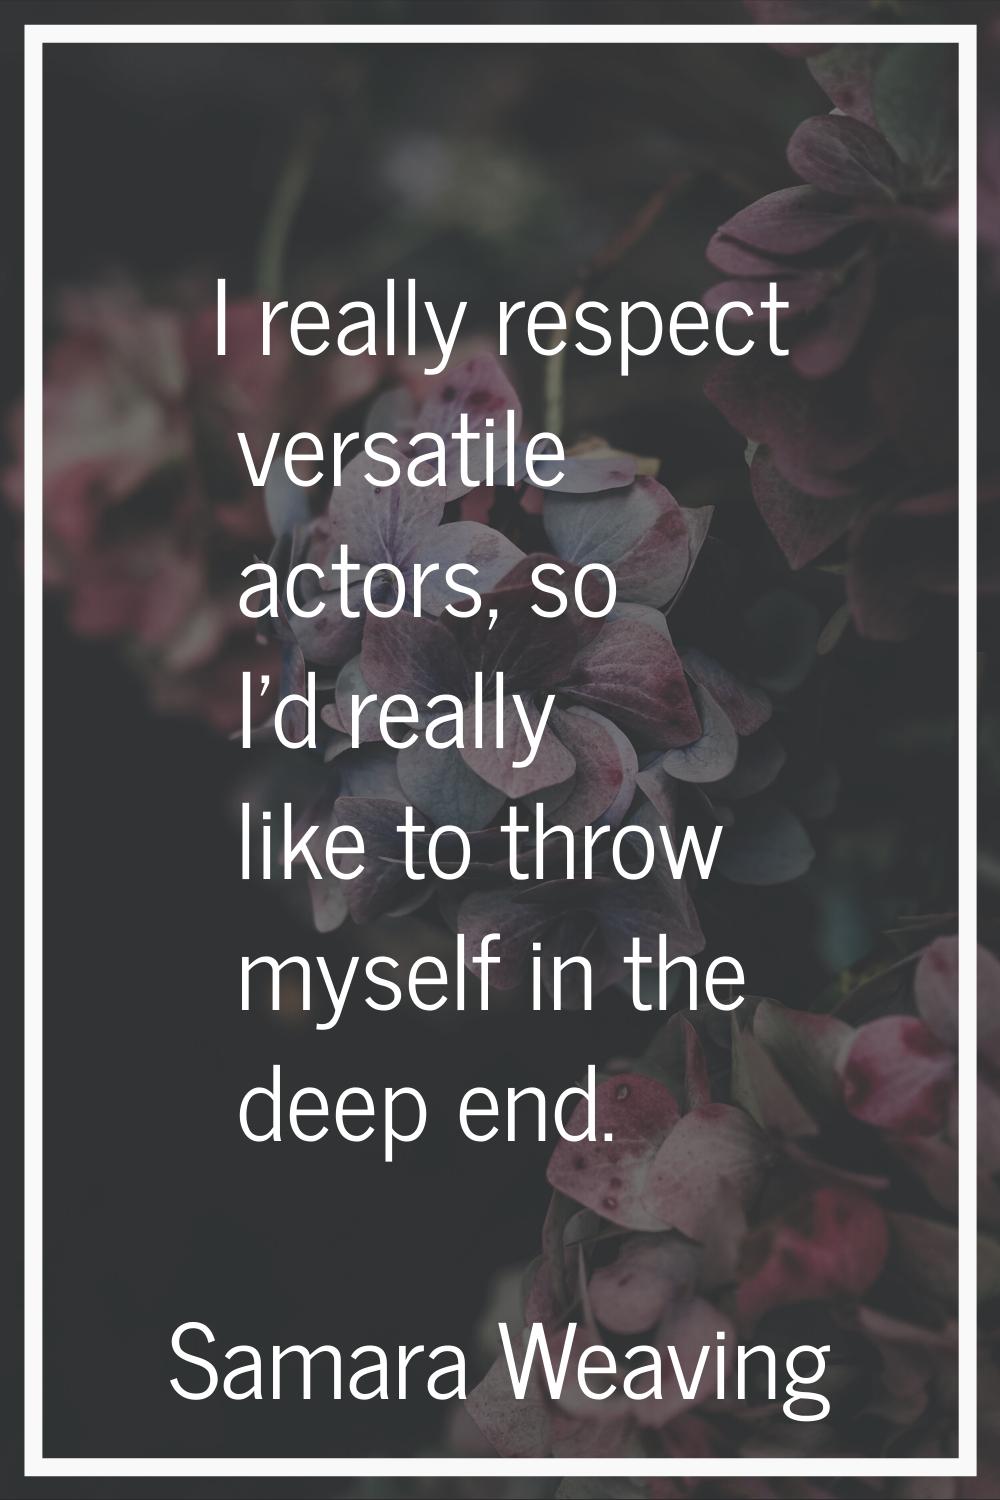 I really respect versatile actors, so I'd really like to throw myself in the deep end.